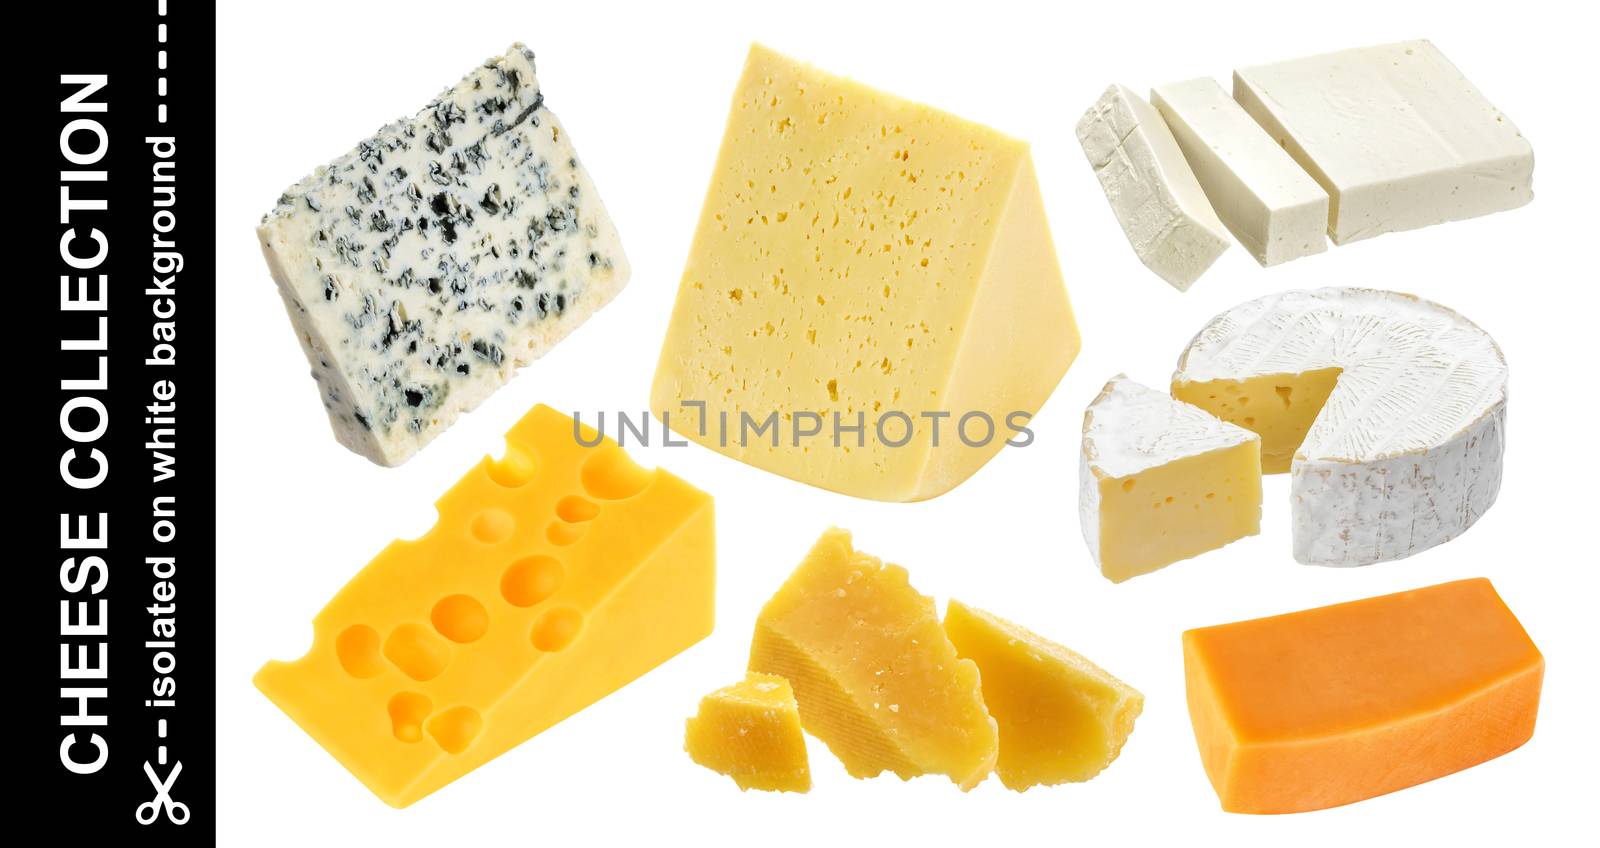 Various types of cheese isolated. Cheddar, parmesan, emmental, blu cheese, camembert, feta on white background by xamtiw